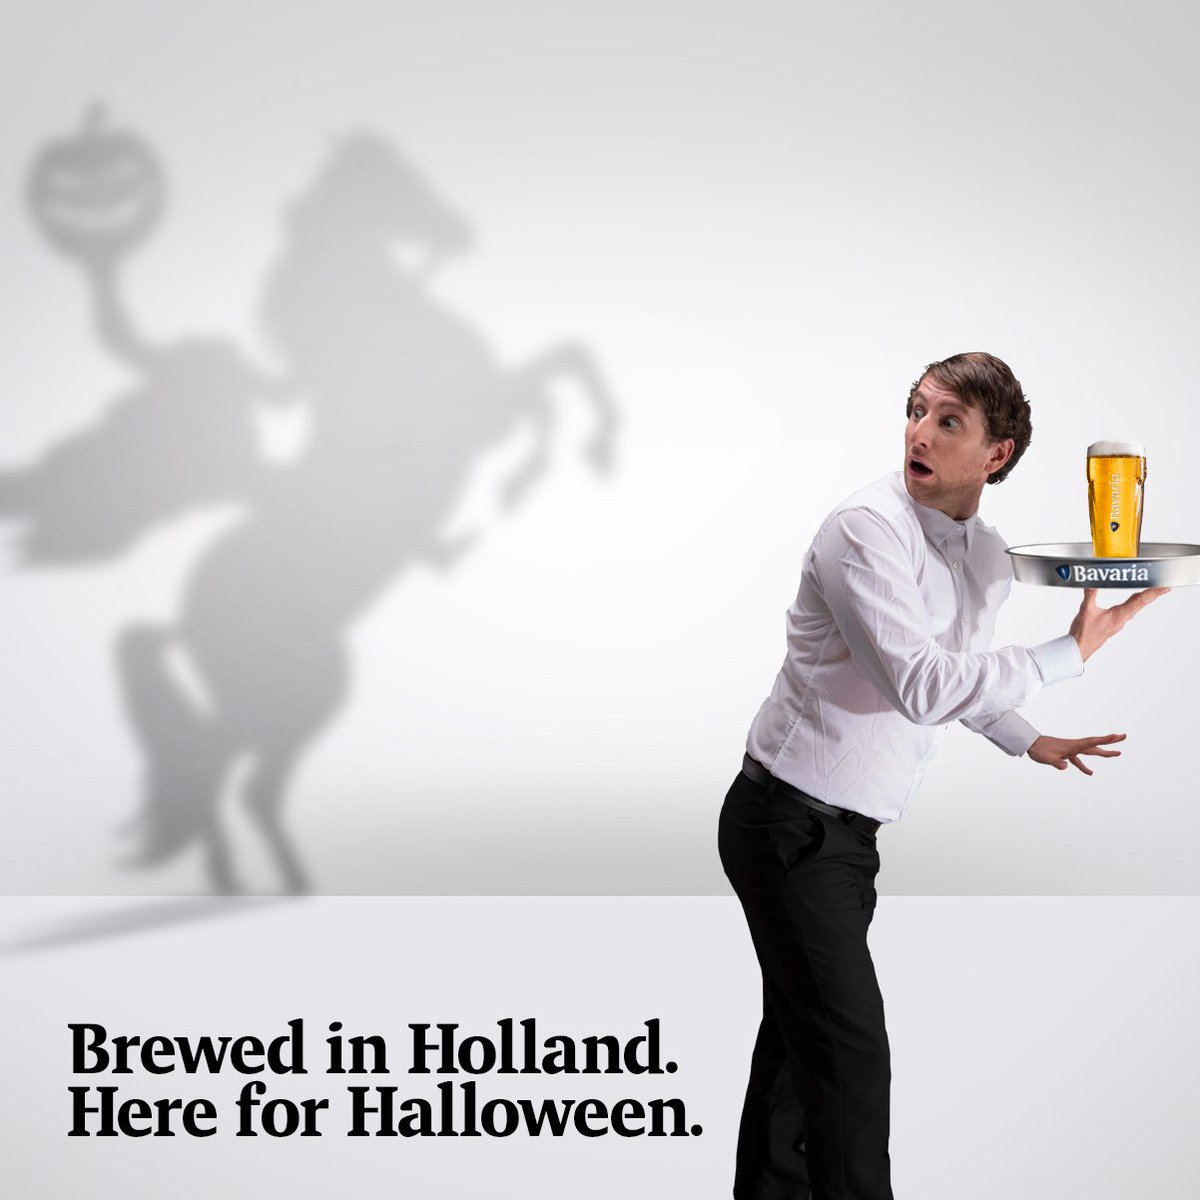 “Sorry, was that a pint or two halves?” Bavaria. A shockingly independent beer. #BavariaBeer #Halloween